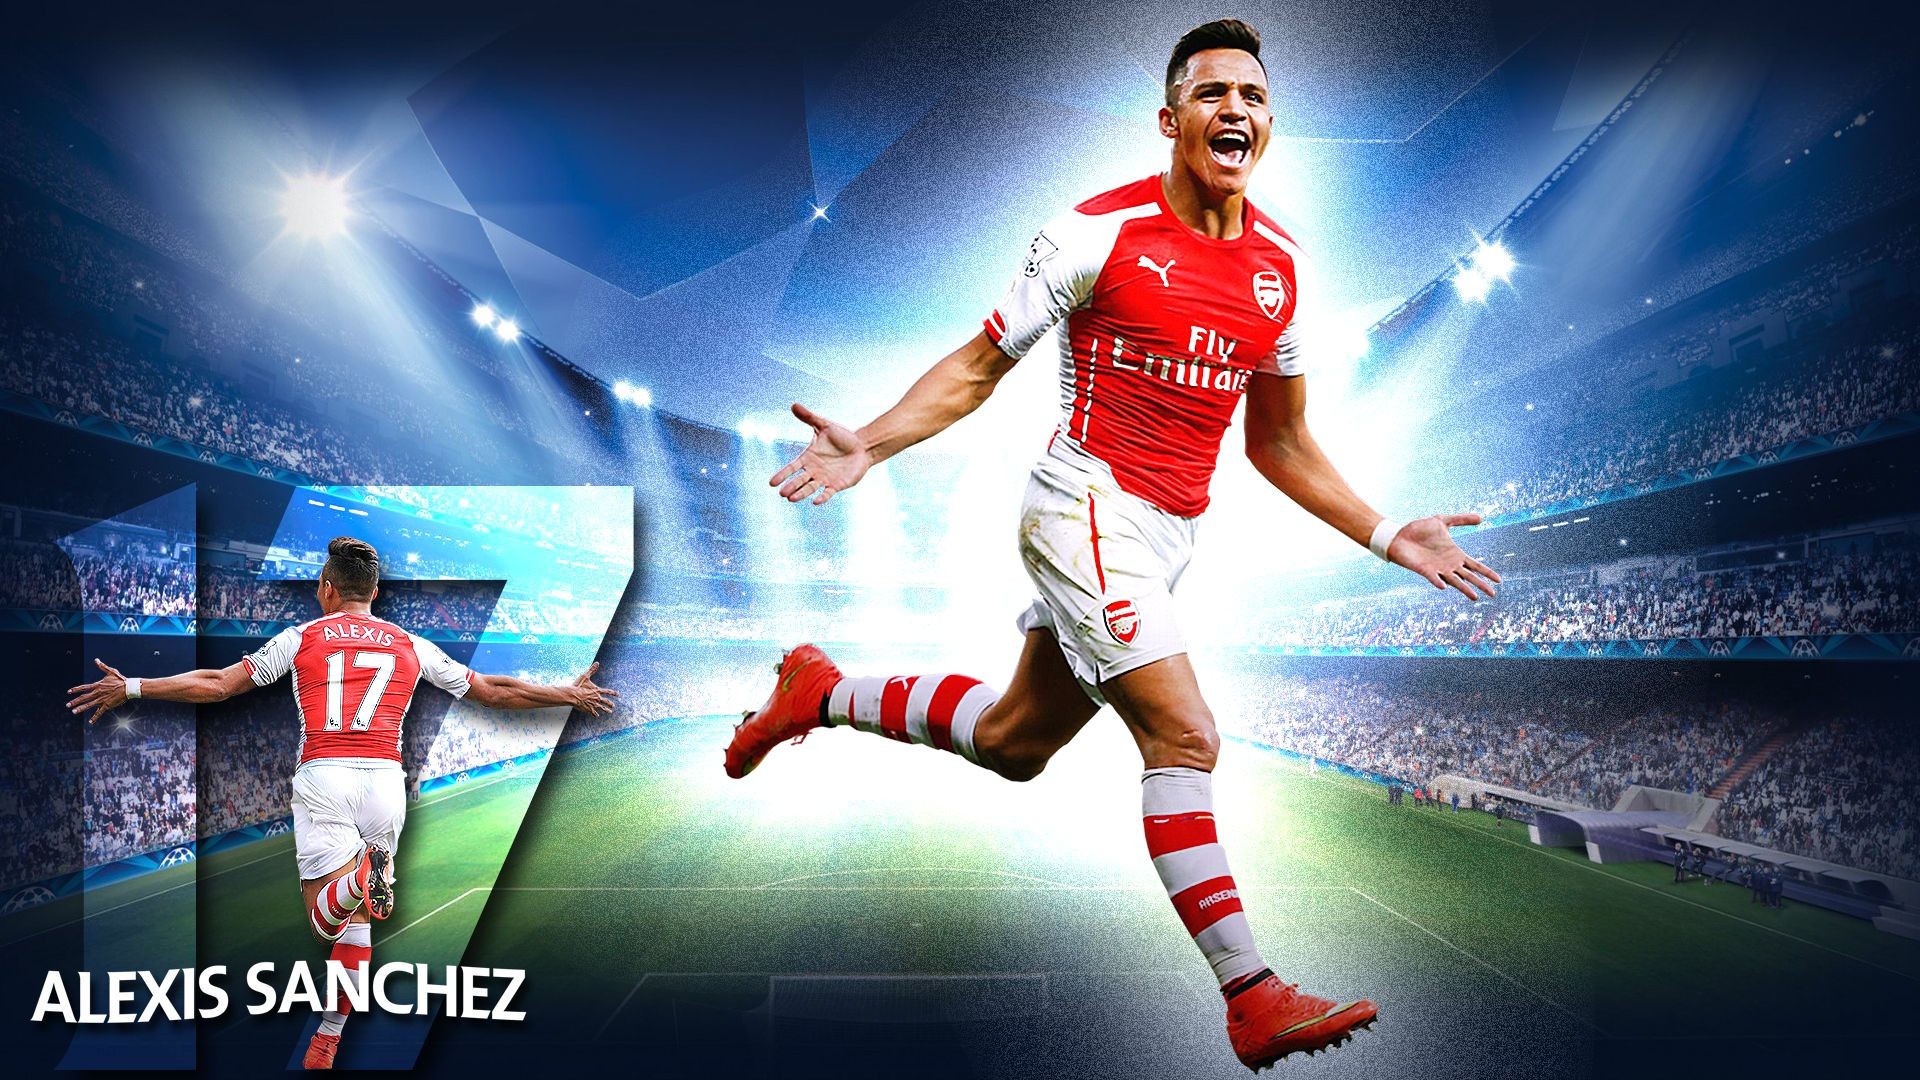 1920x1080 Alexis Sanchez HD Wallpaper http://wallpapers-and-backgrounds.net/